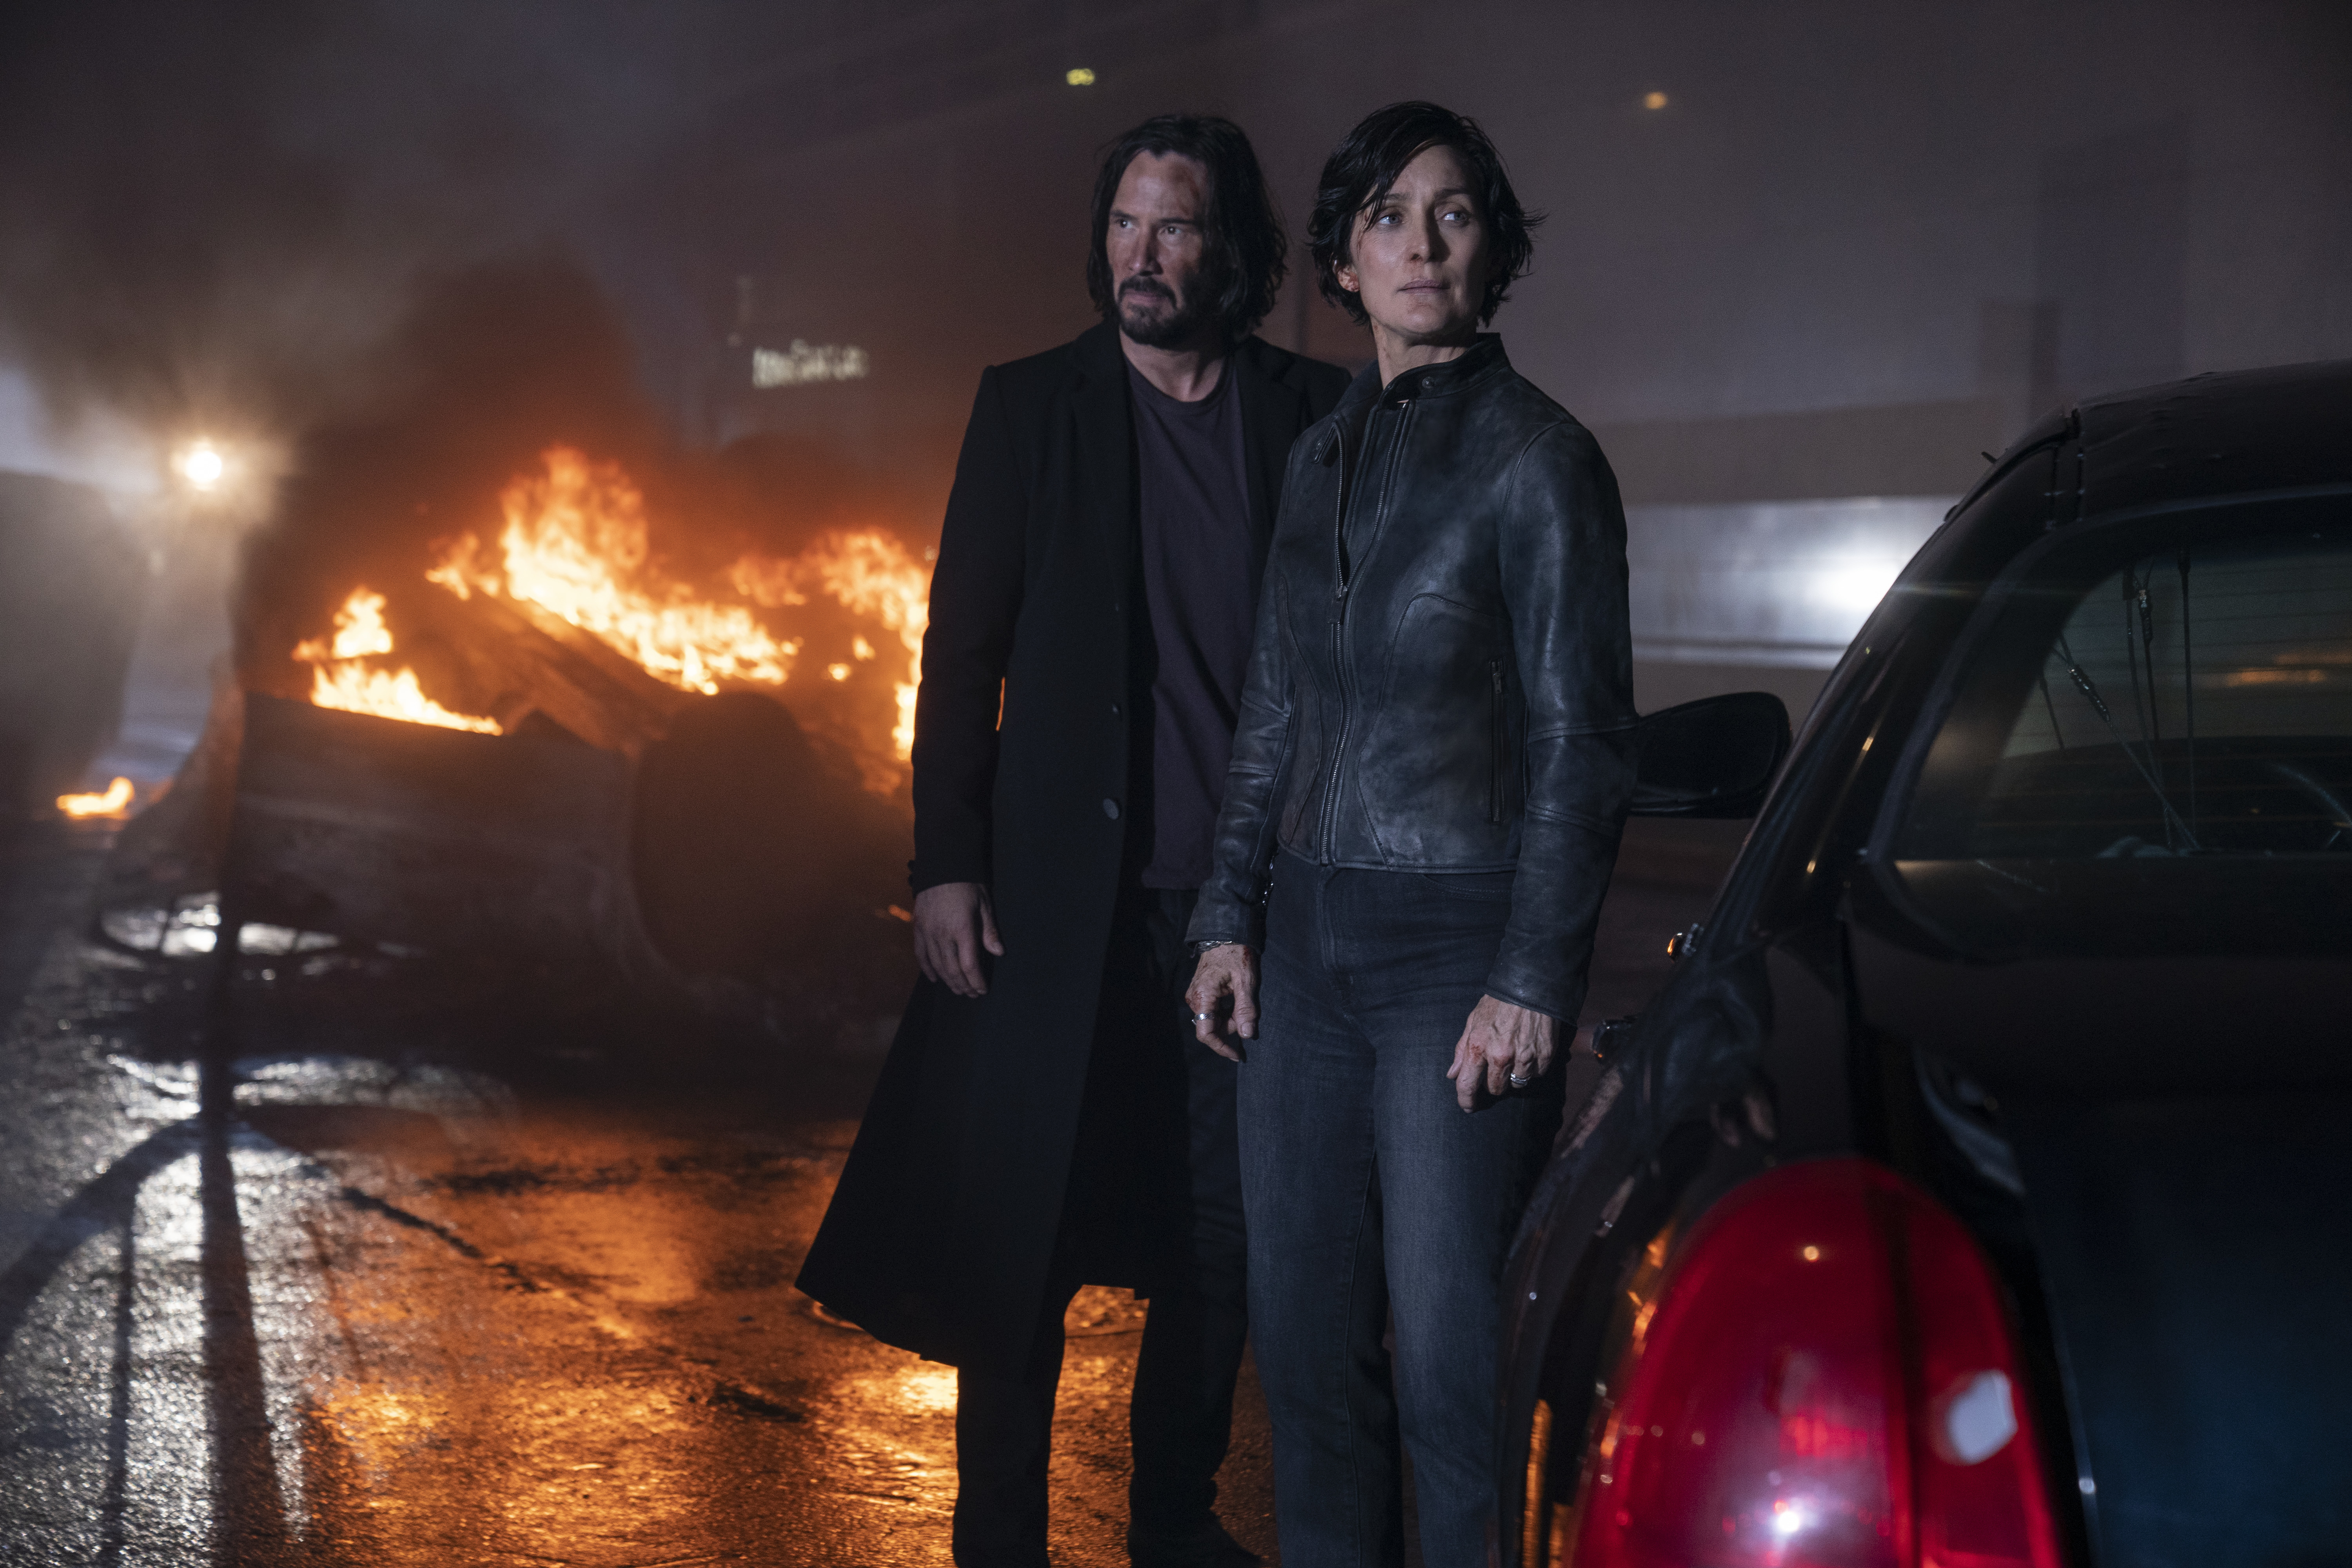 Neo and Trinity stand in front of burning wreckage in The Matrix Resurrections.